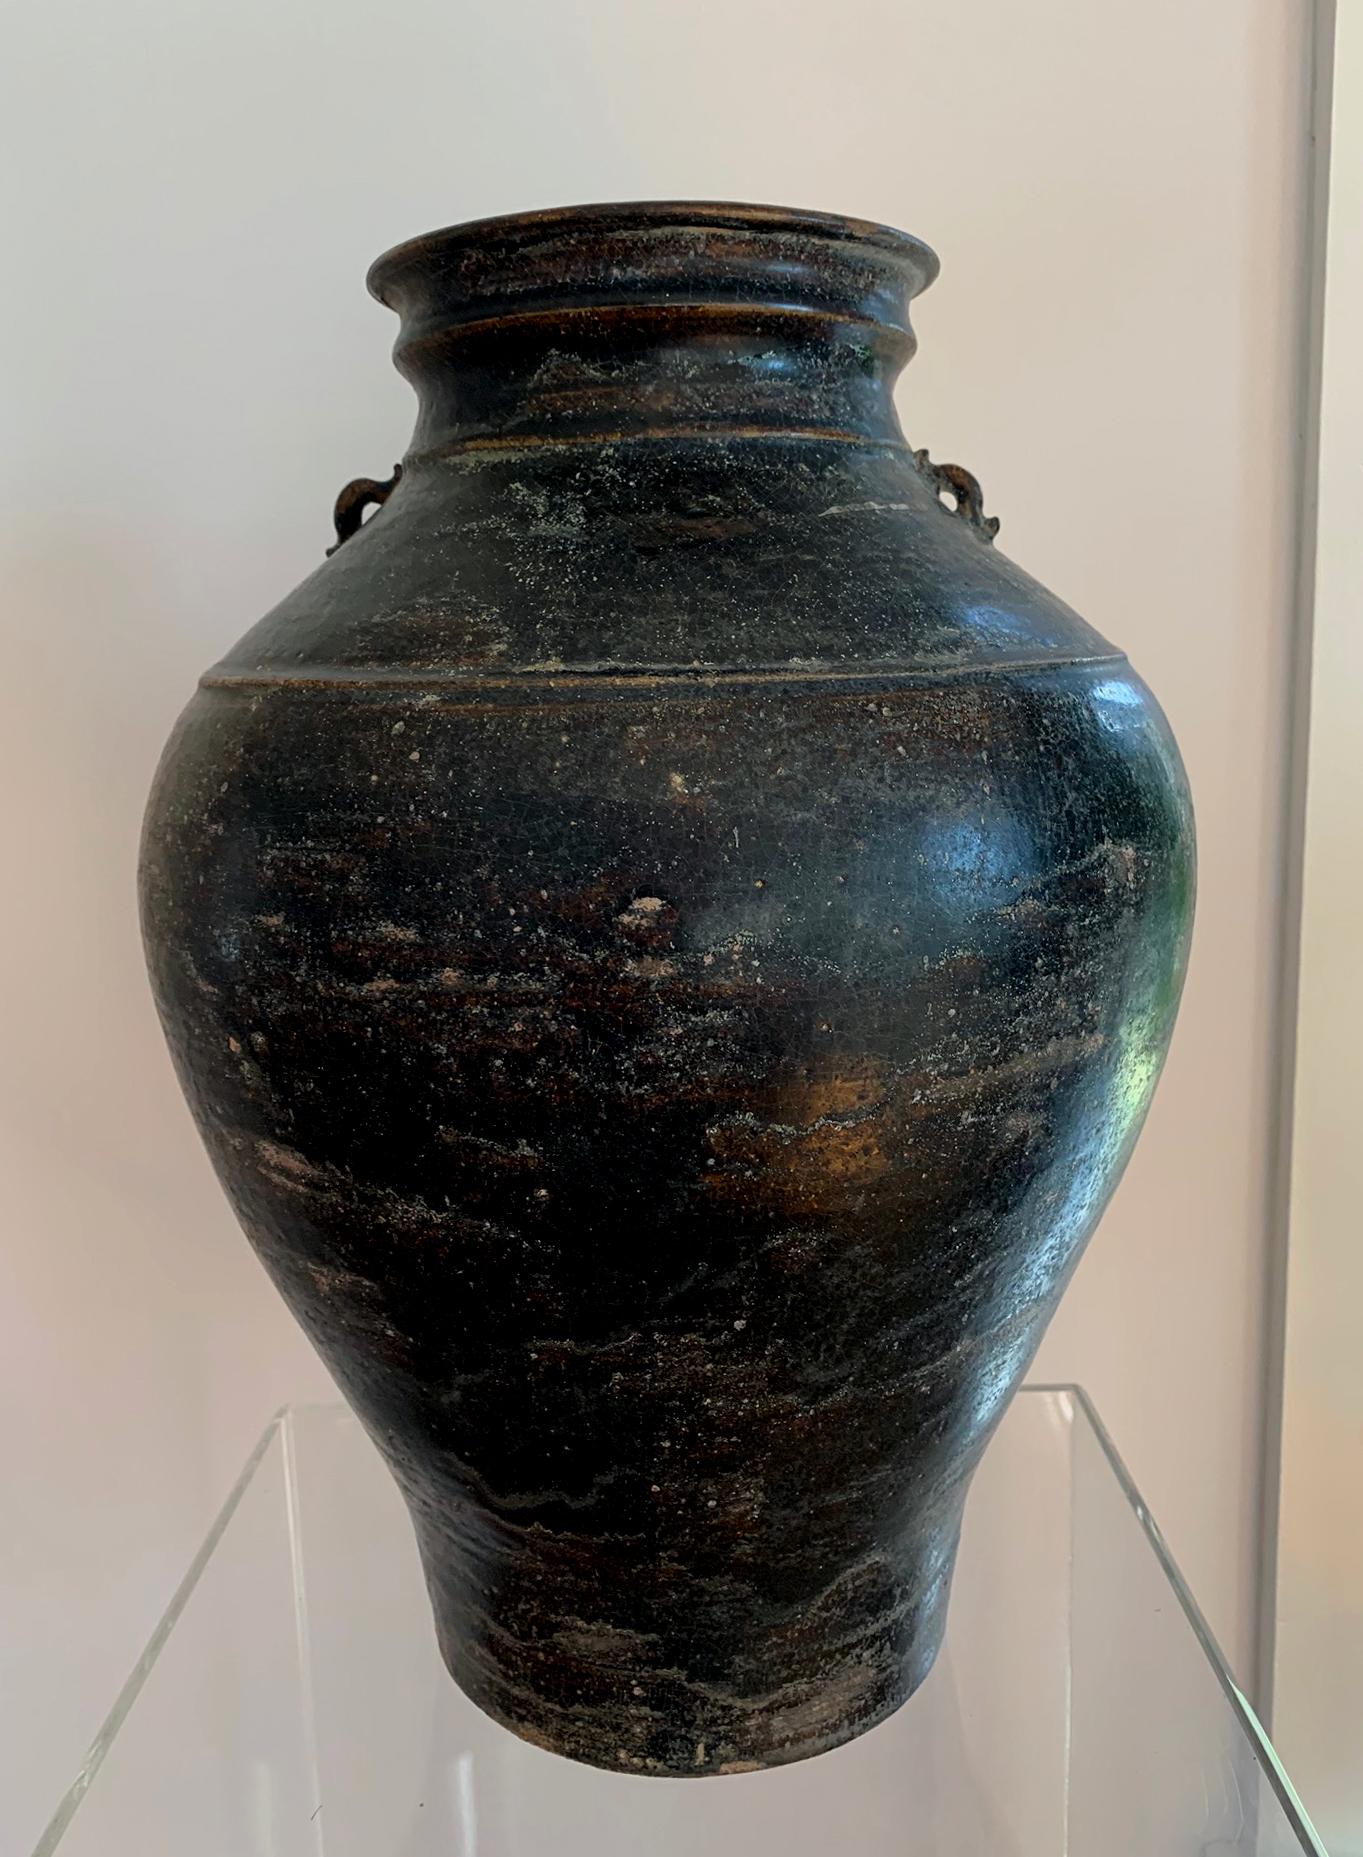 On offer is a stoneware ceramic jar with black iron glaze from Khmer Kingdom (now Cambodia) dated to Angkor period circa 12th century. The vase is constructed in a solid but elegant form with a slightly terraced neck and mouth. Two molded and